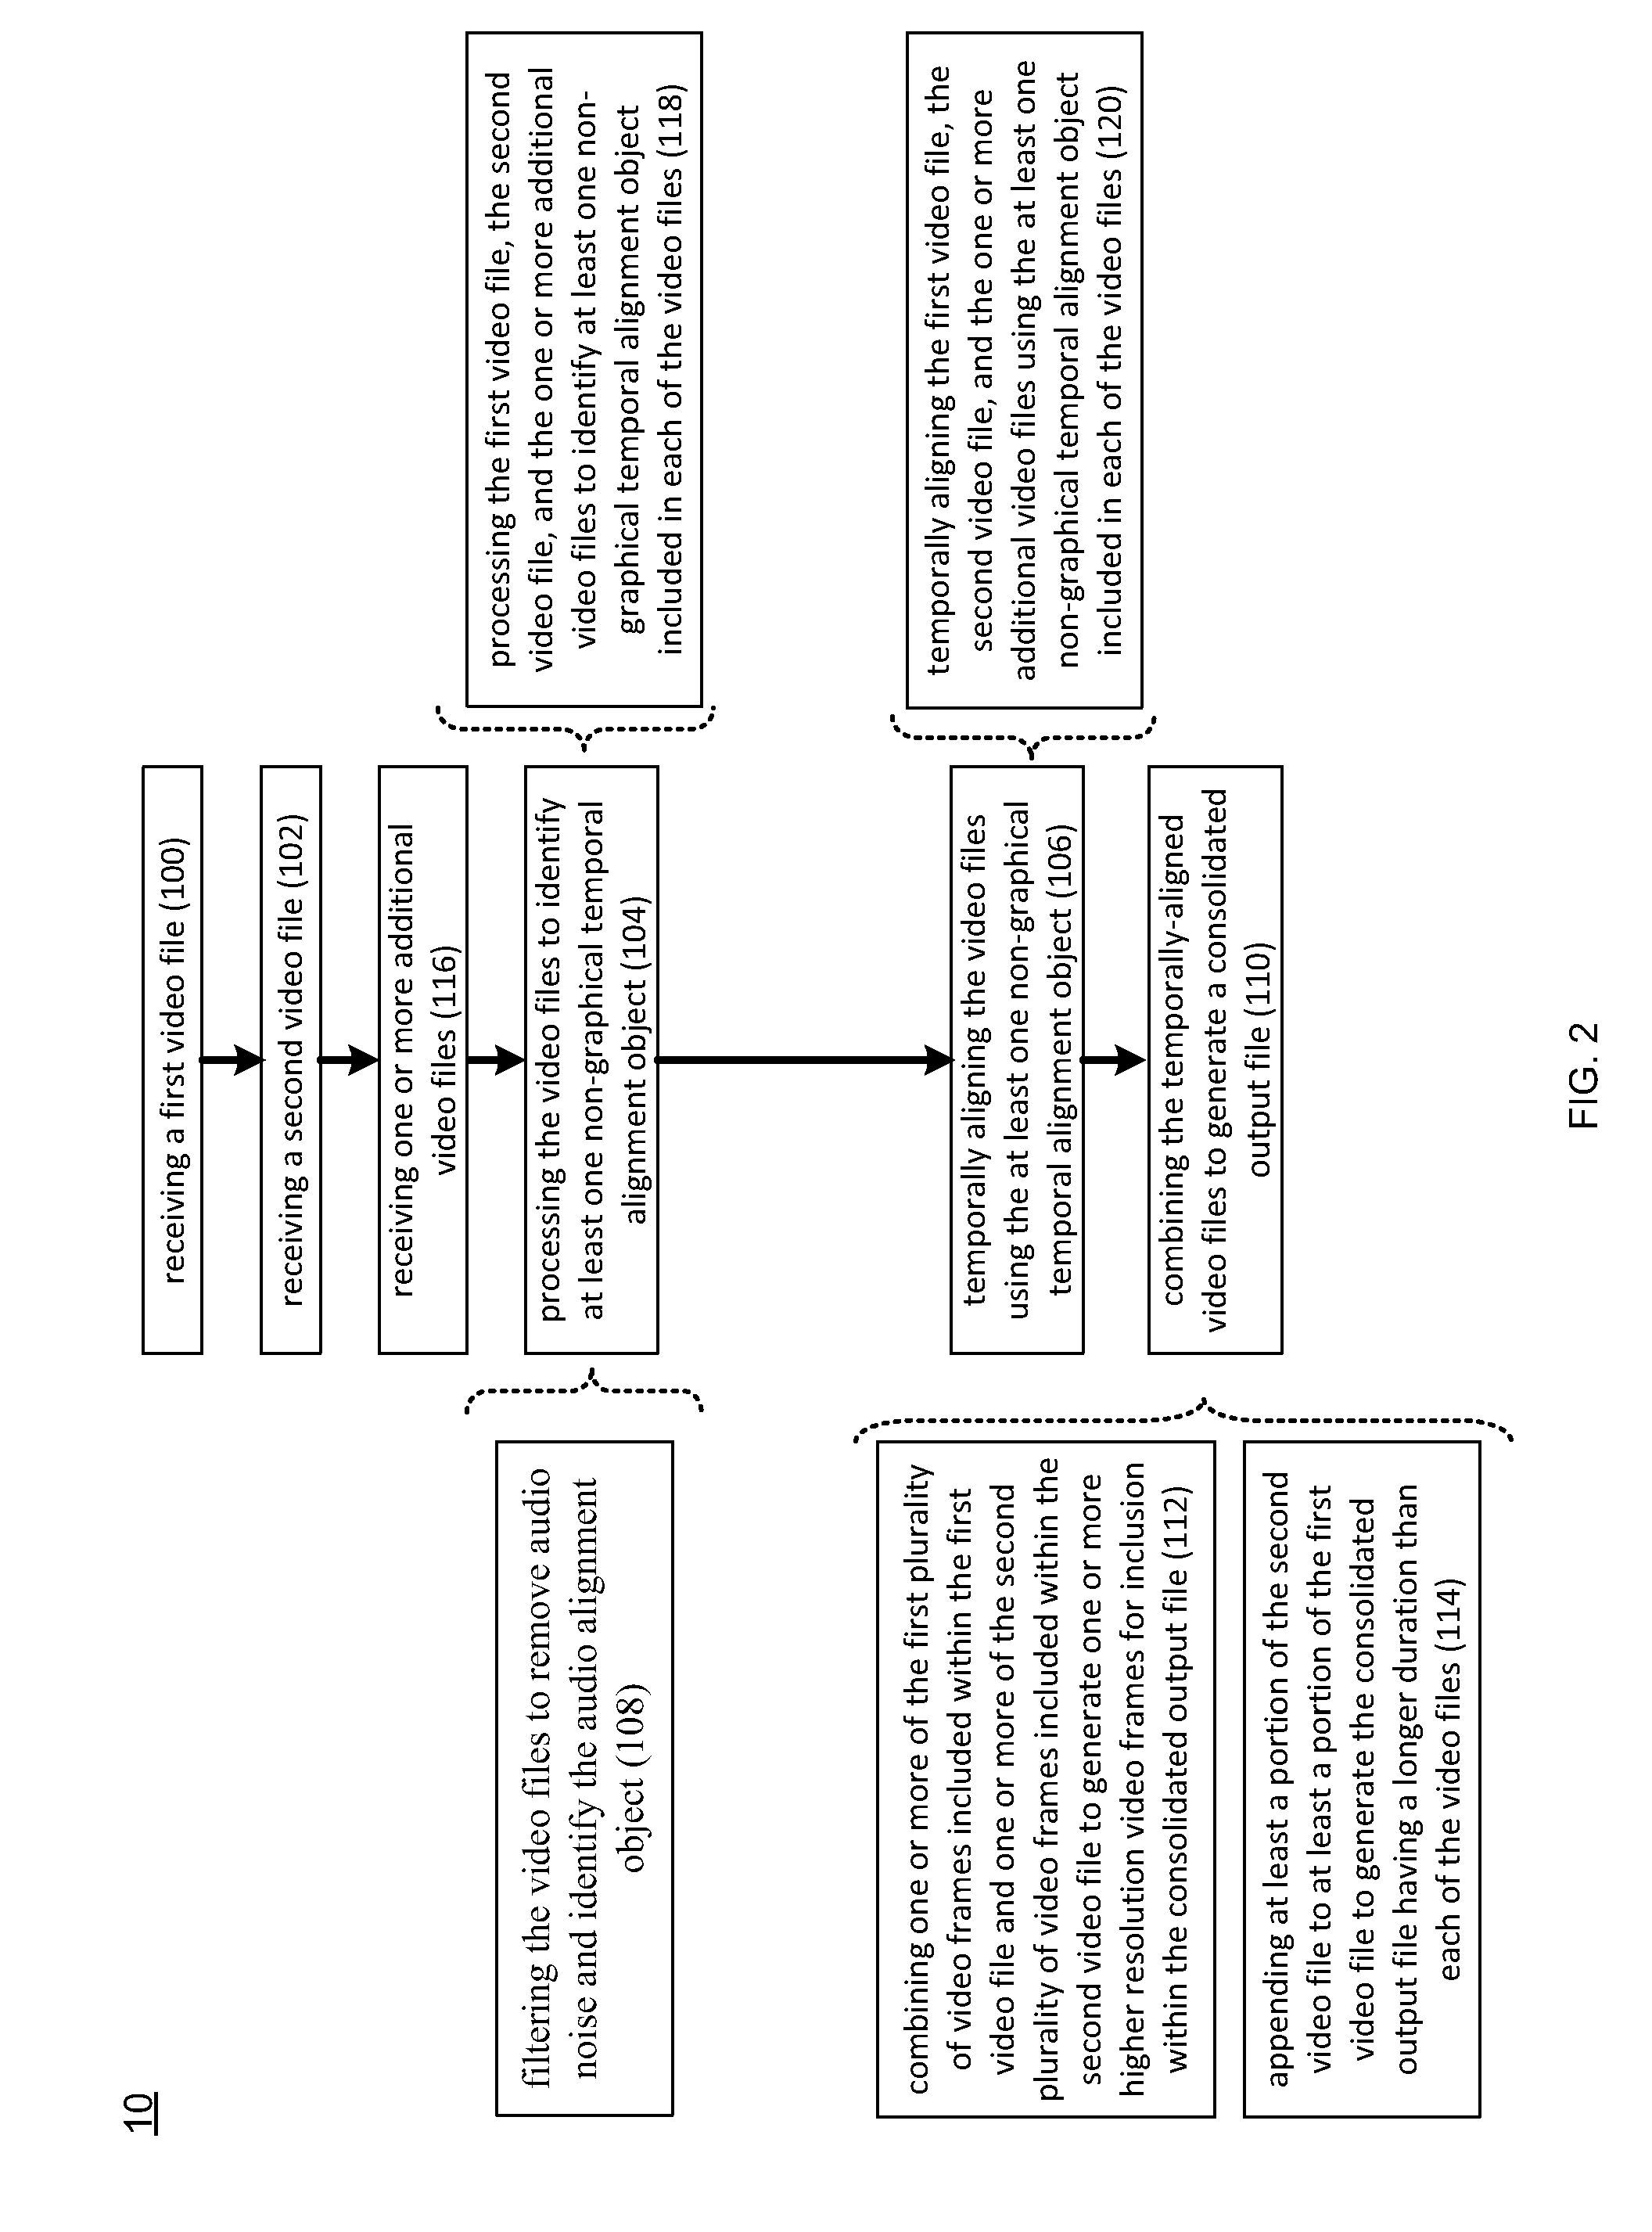 Video Stitching System and Method